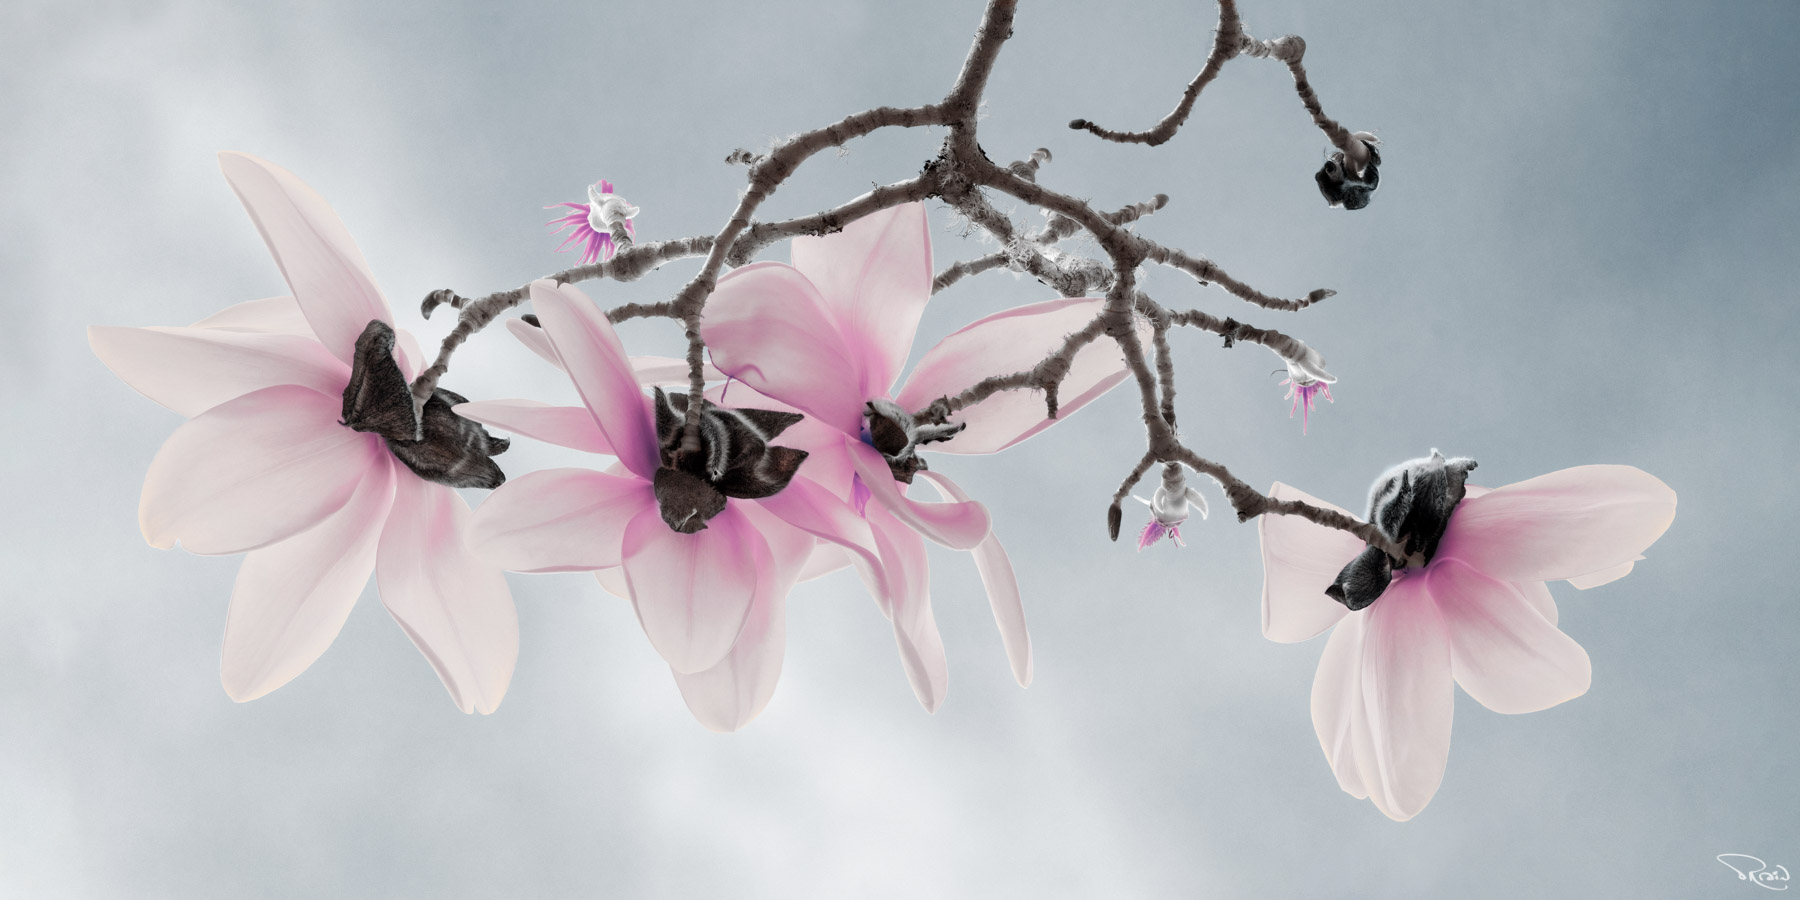 A branch of pink-tinged cup-and-saucer magnolias sways overhead against a softly clouded blue sky.